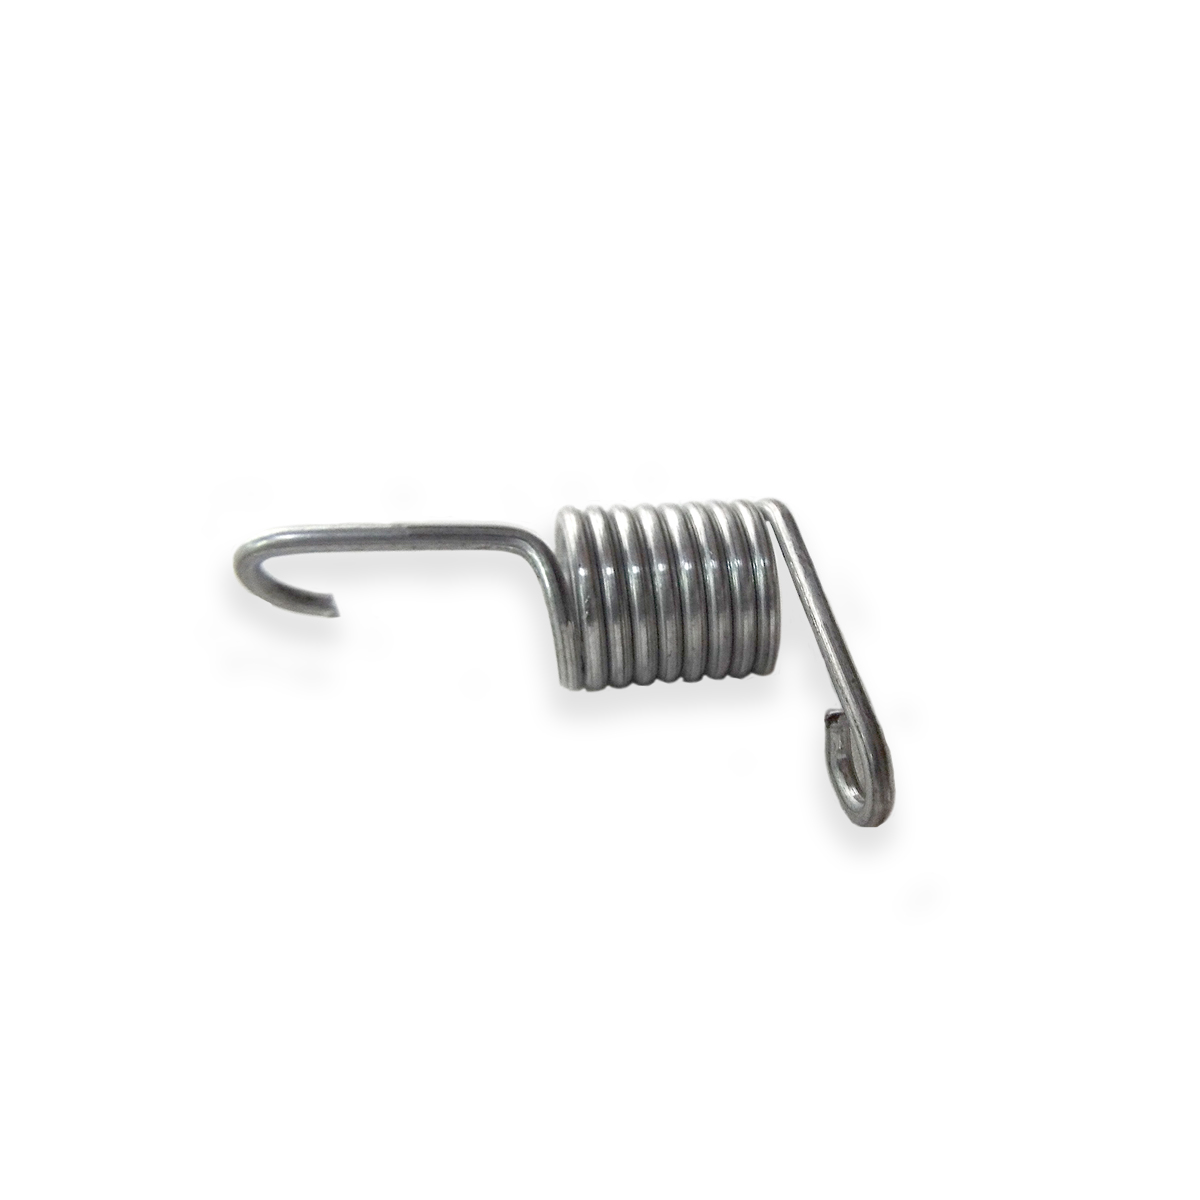 1947-1959 Headlight Adjusting Spring Chevrolet and GMC Pickup and Big Truck